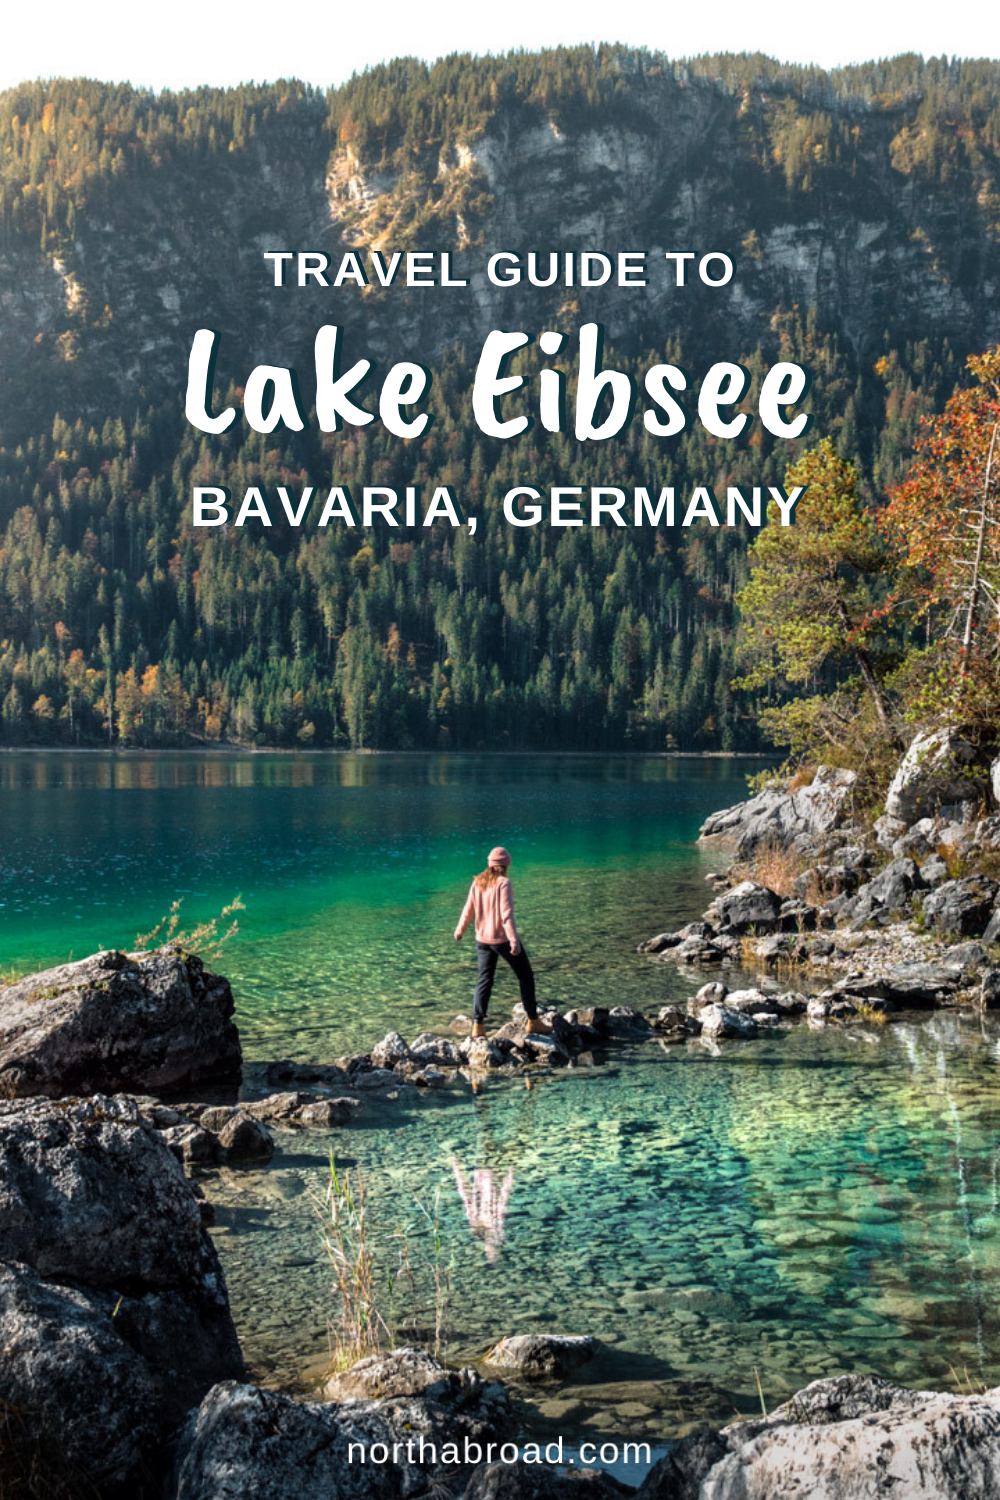 Everything you need to know about visiting gorgeous Eibsee in the Bavarian Alps including what to do, best photo spots, how to get there and more.